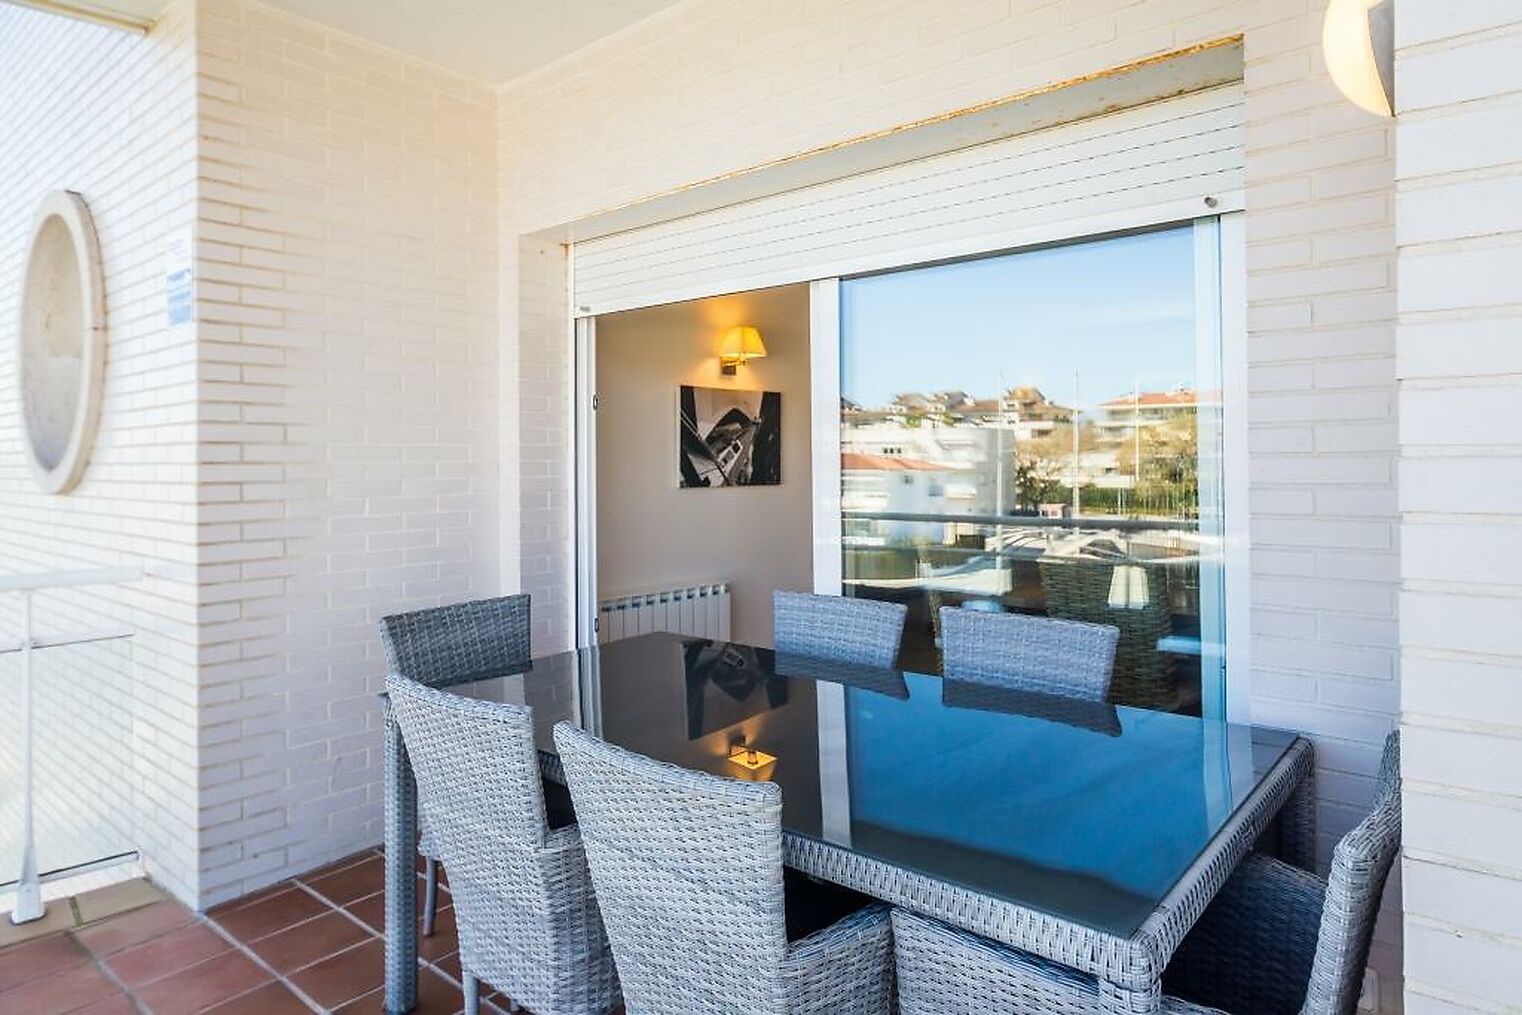 Beautiful apartment in the port area of Platja d'Aro